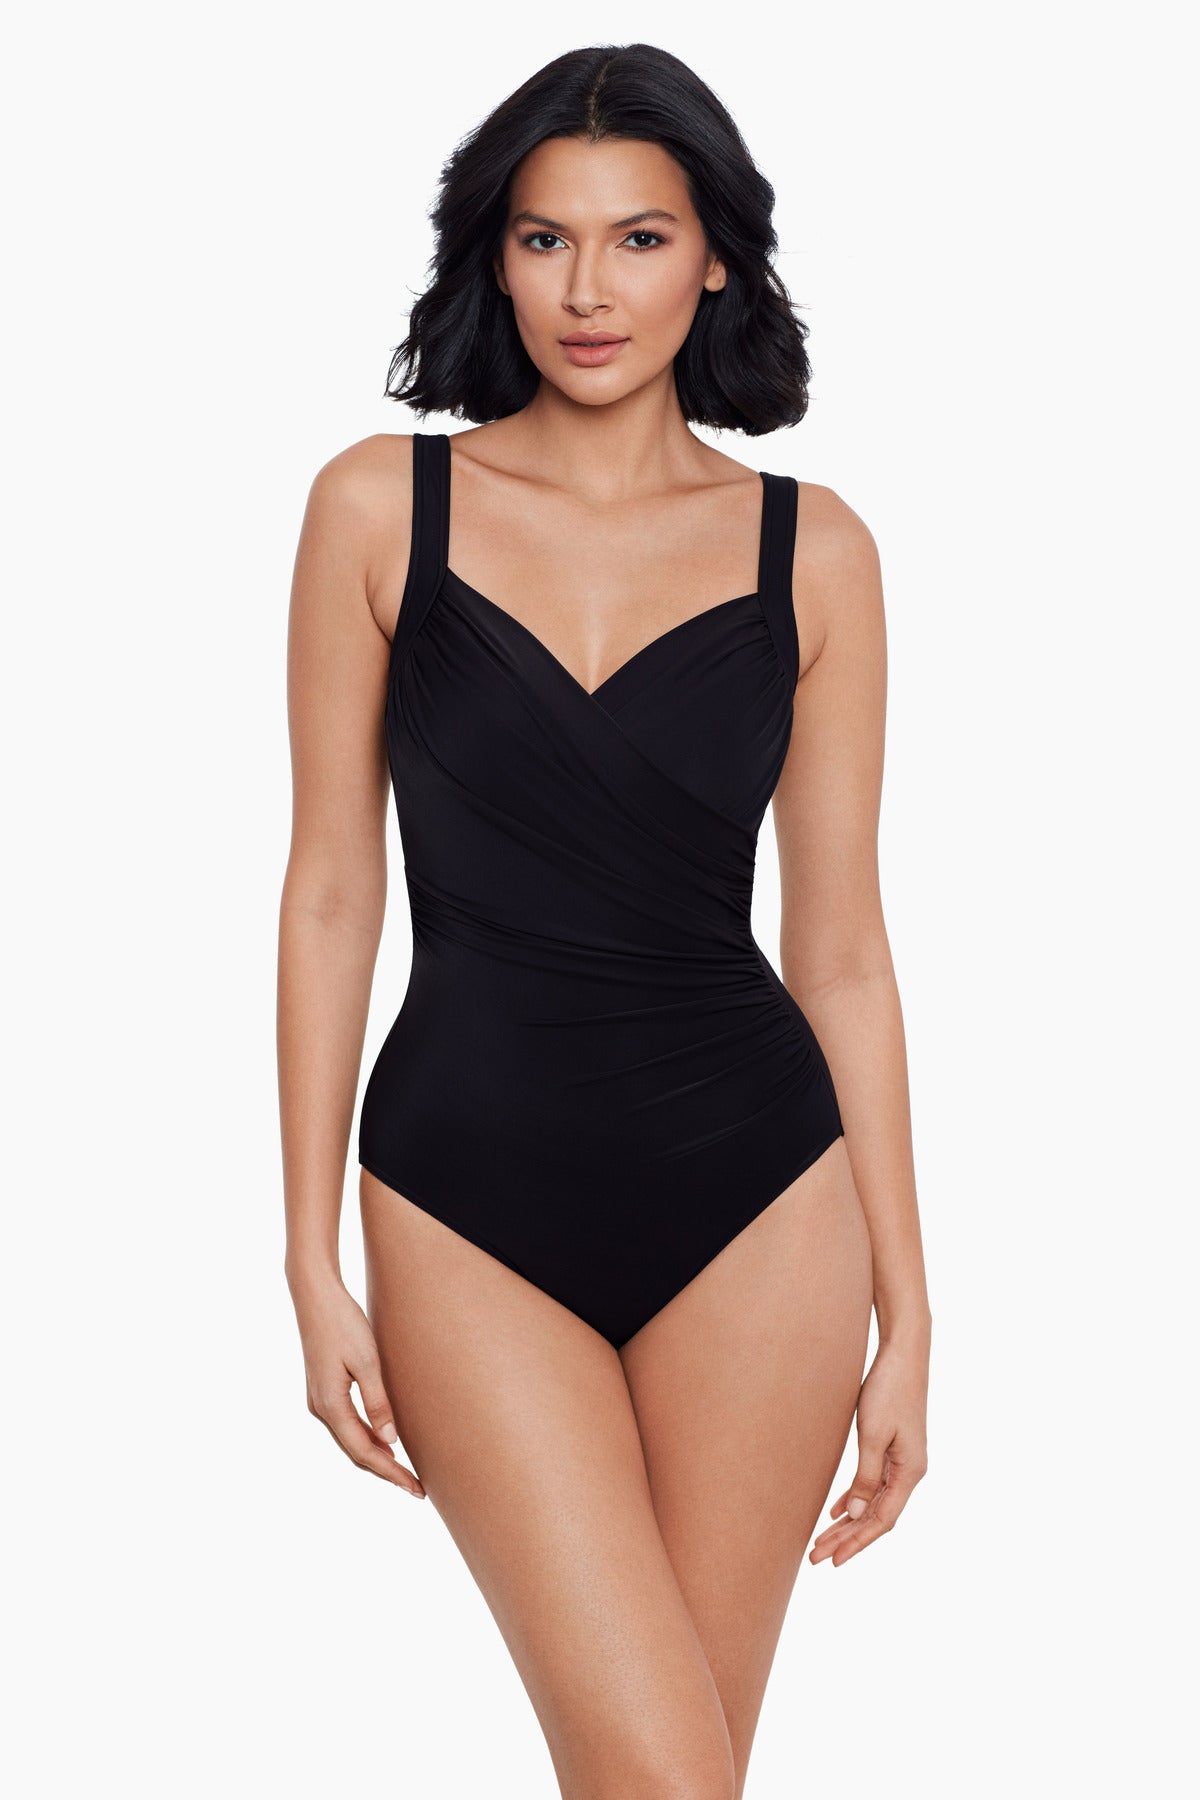 Must Haves Sanibel One Piece Swimsuit DD-Cup